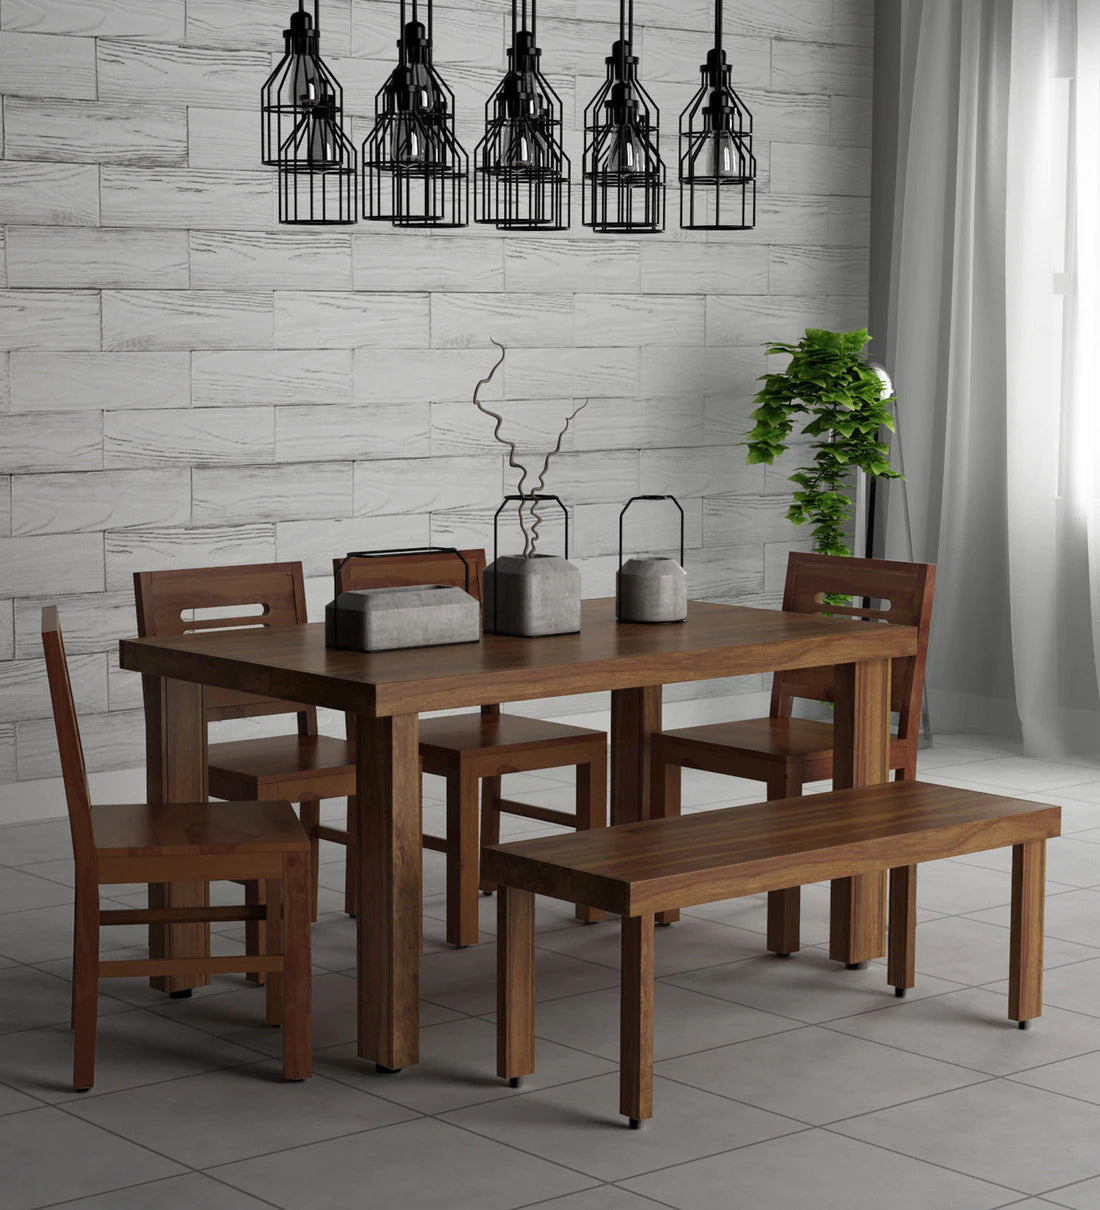 Acro Solid Sheesham Wood 6 Seater Dining Set with Bench For Dining Room - Rajwada Furnish